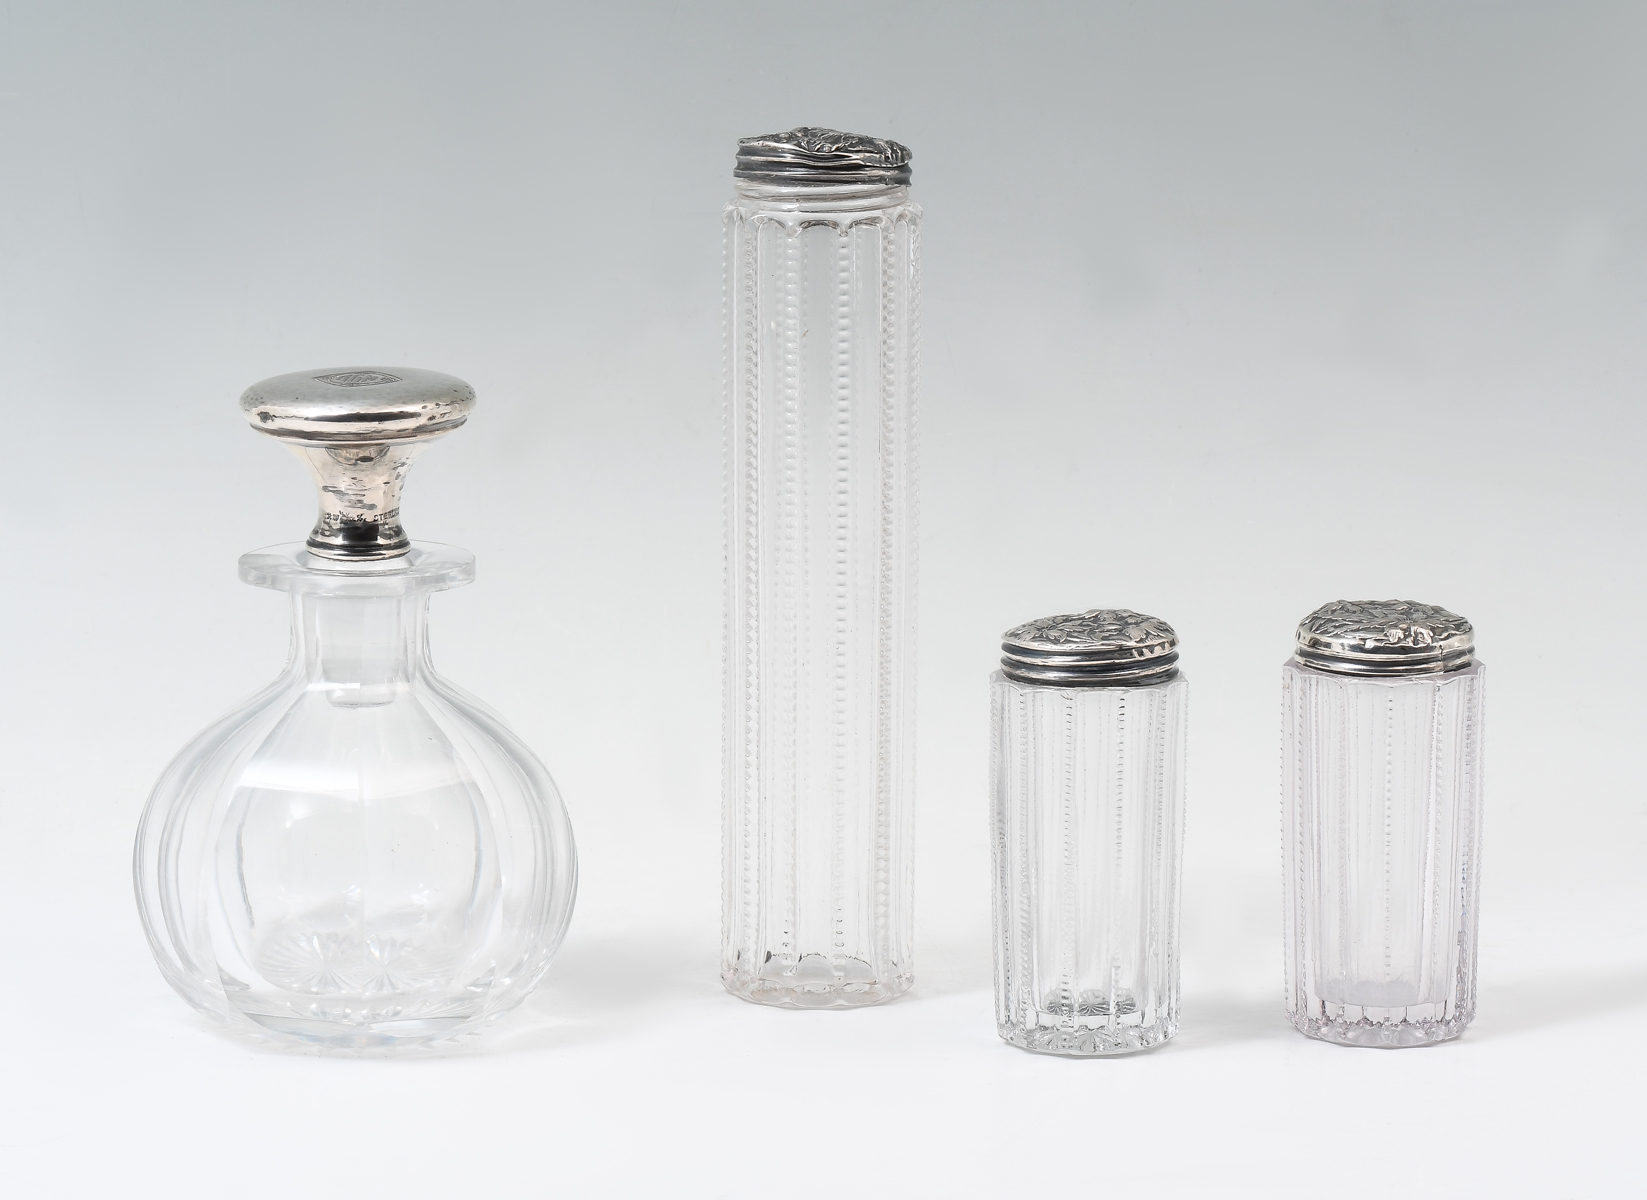 4 CUT GLASS VANITY BOTTLES WITH 36c09e